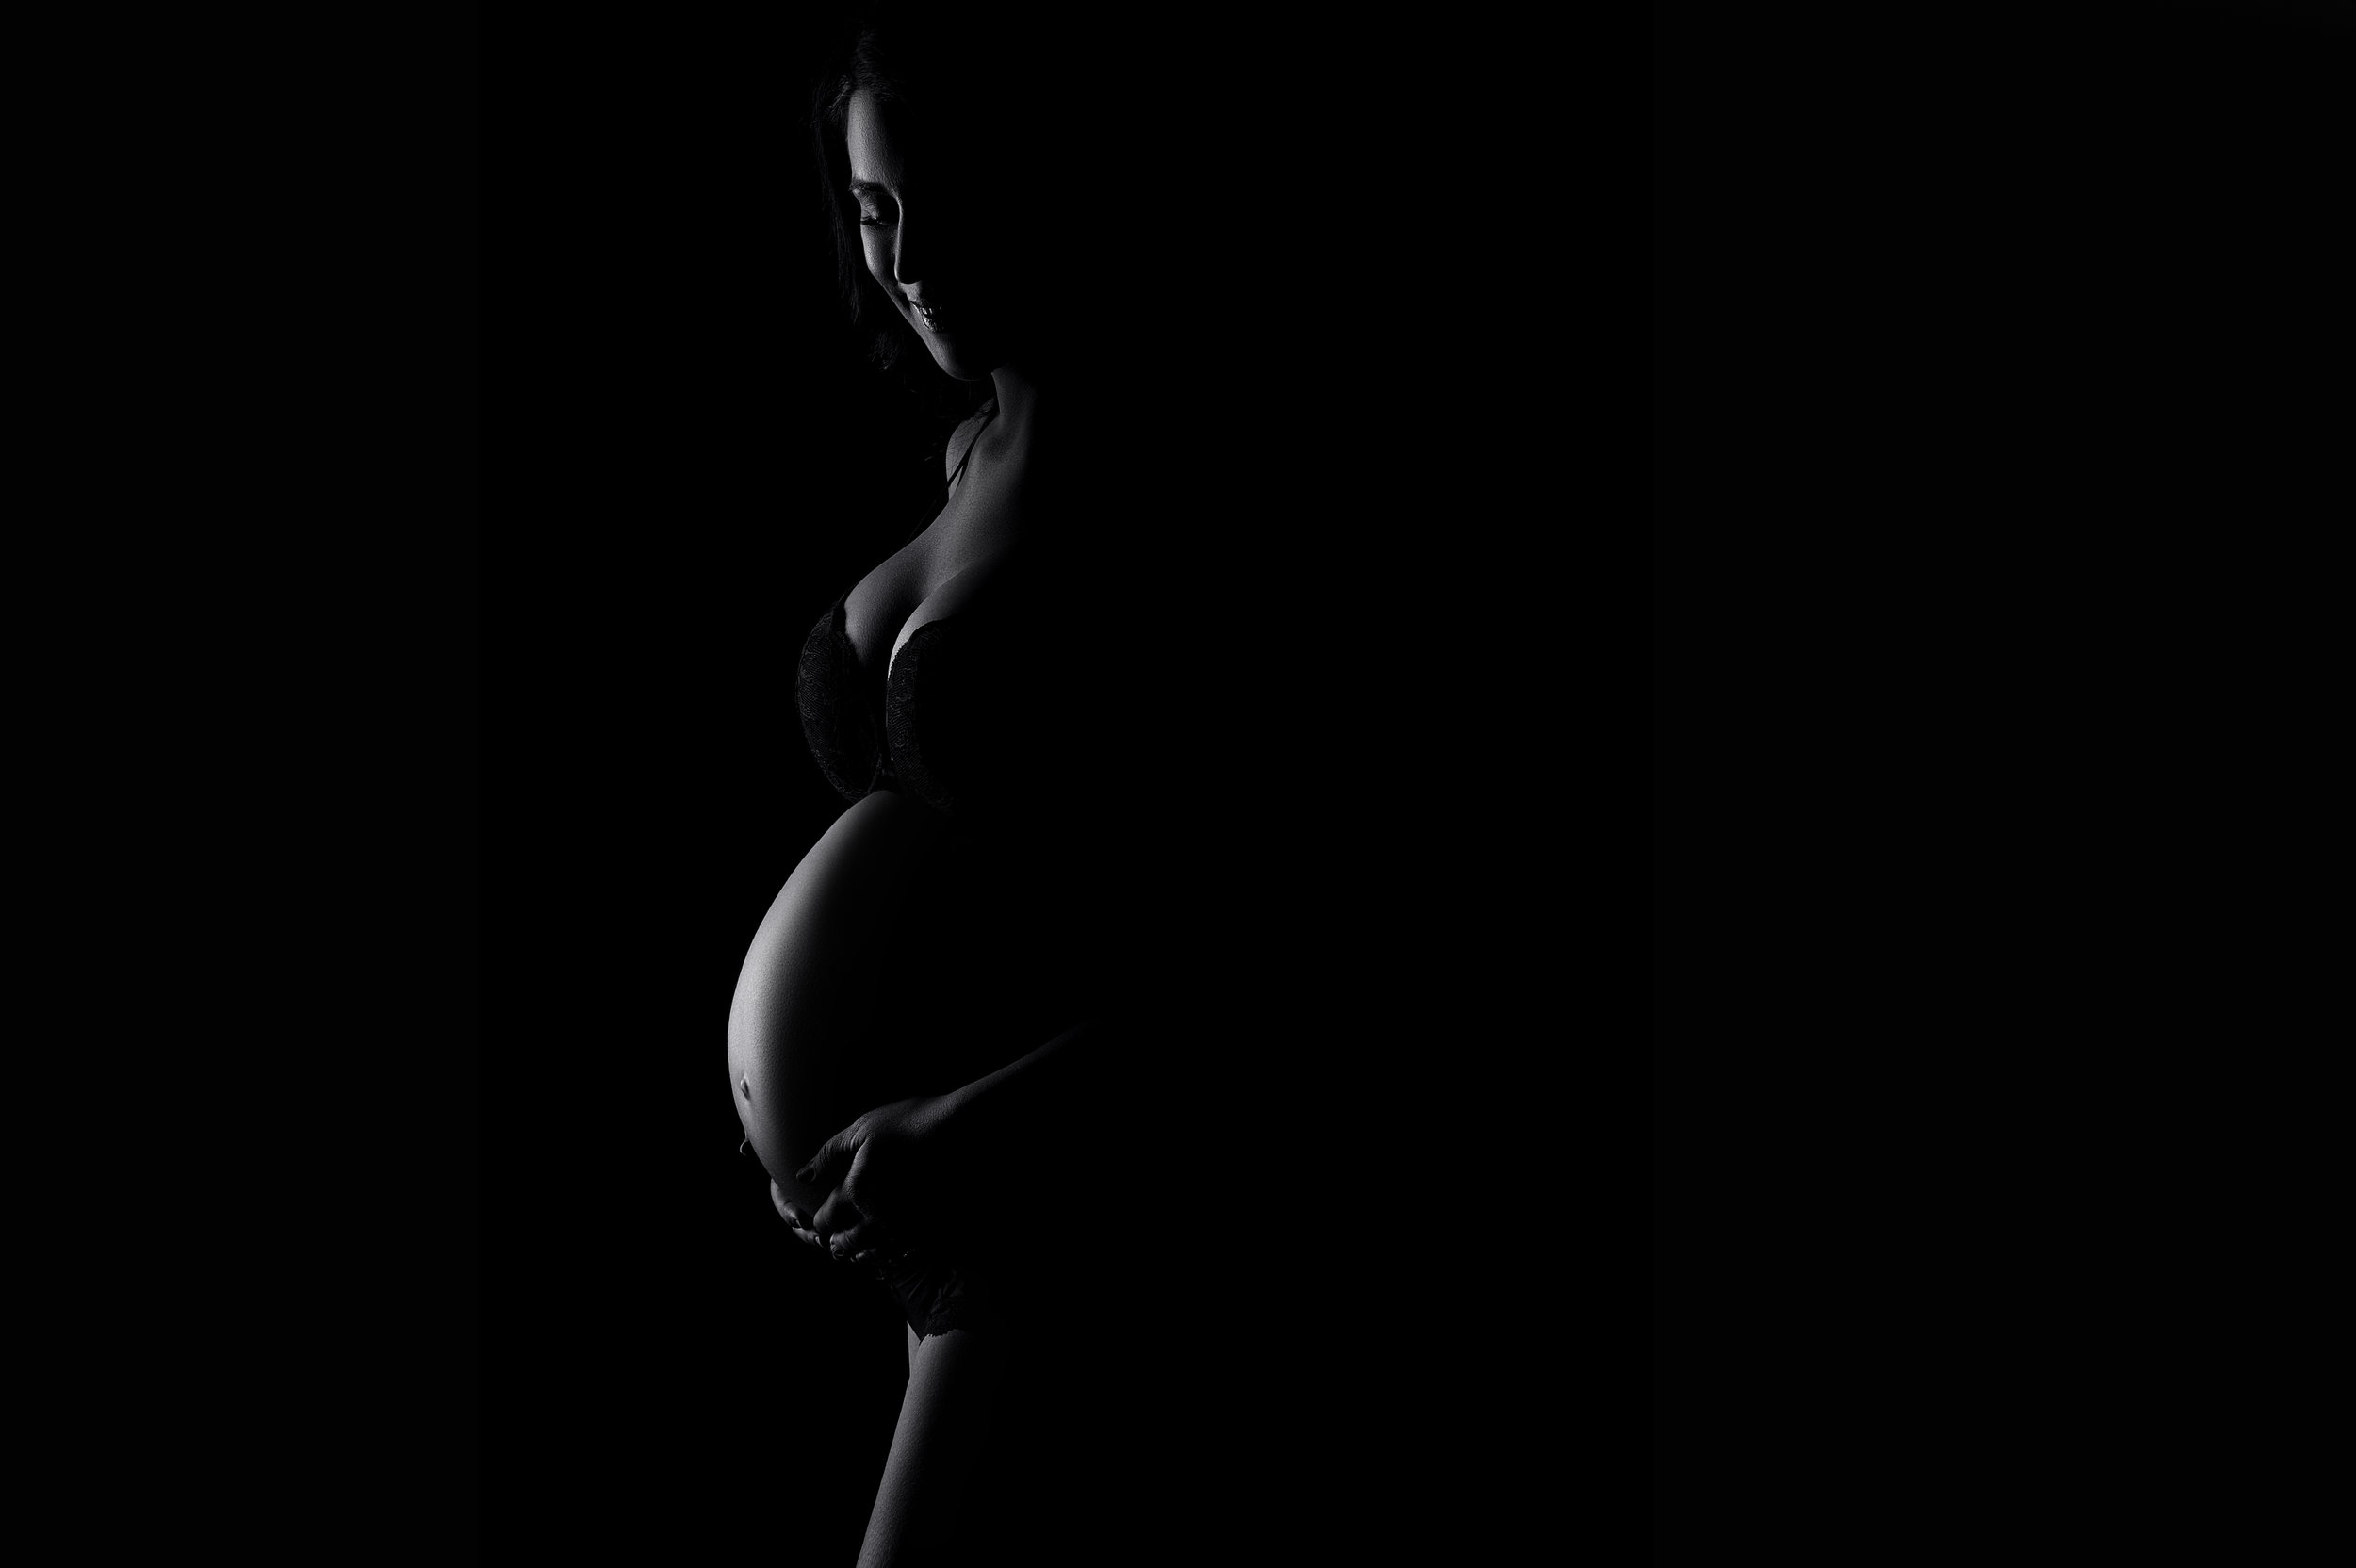 Black and white maternity pose